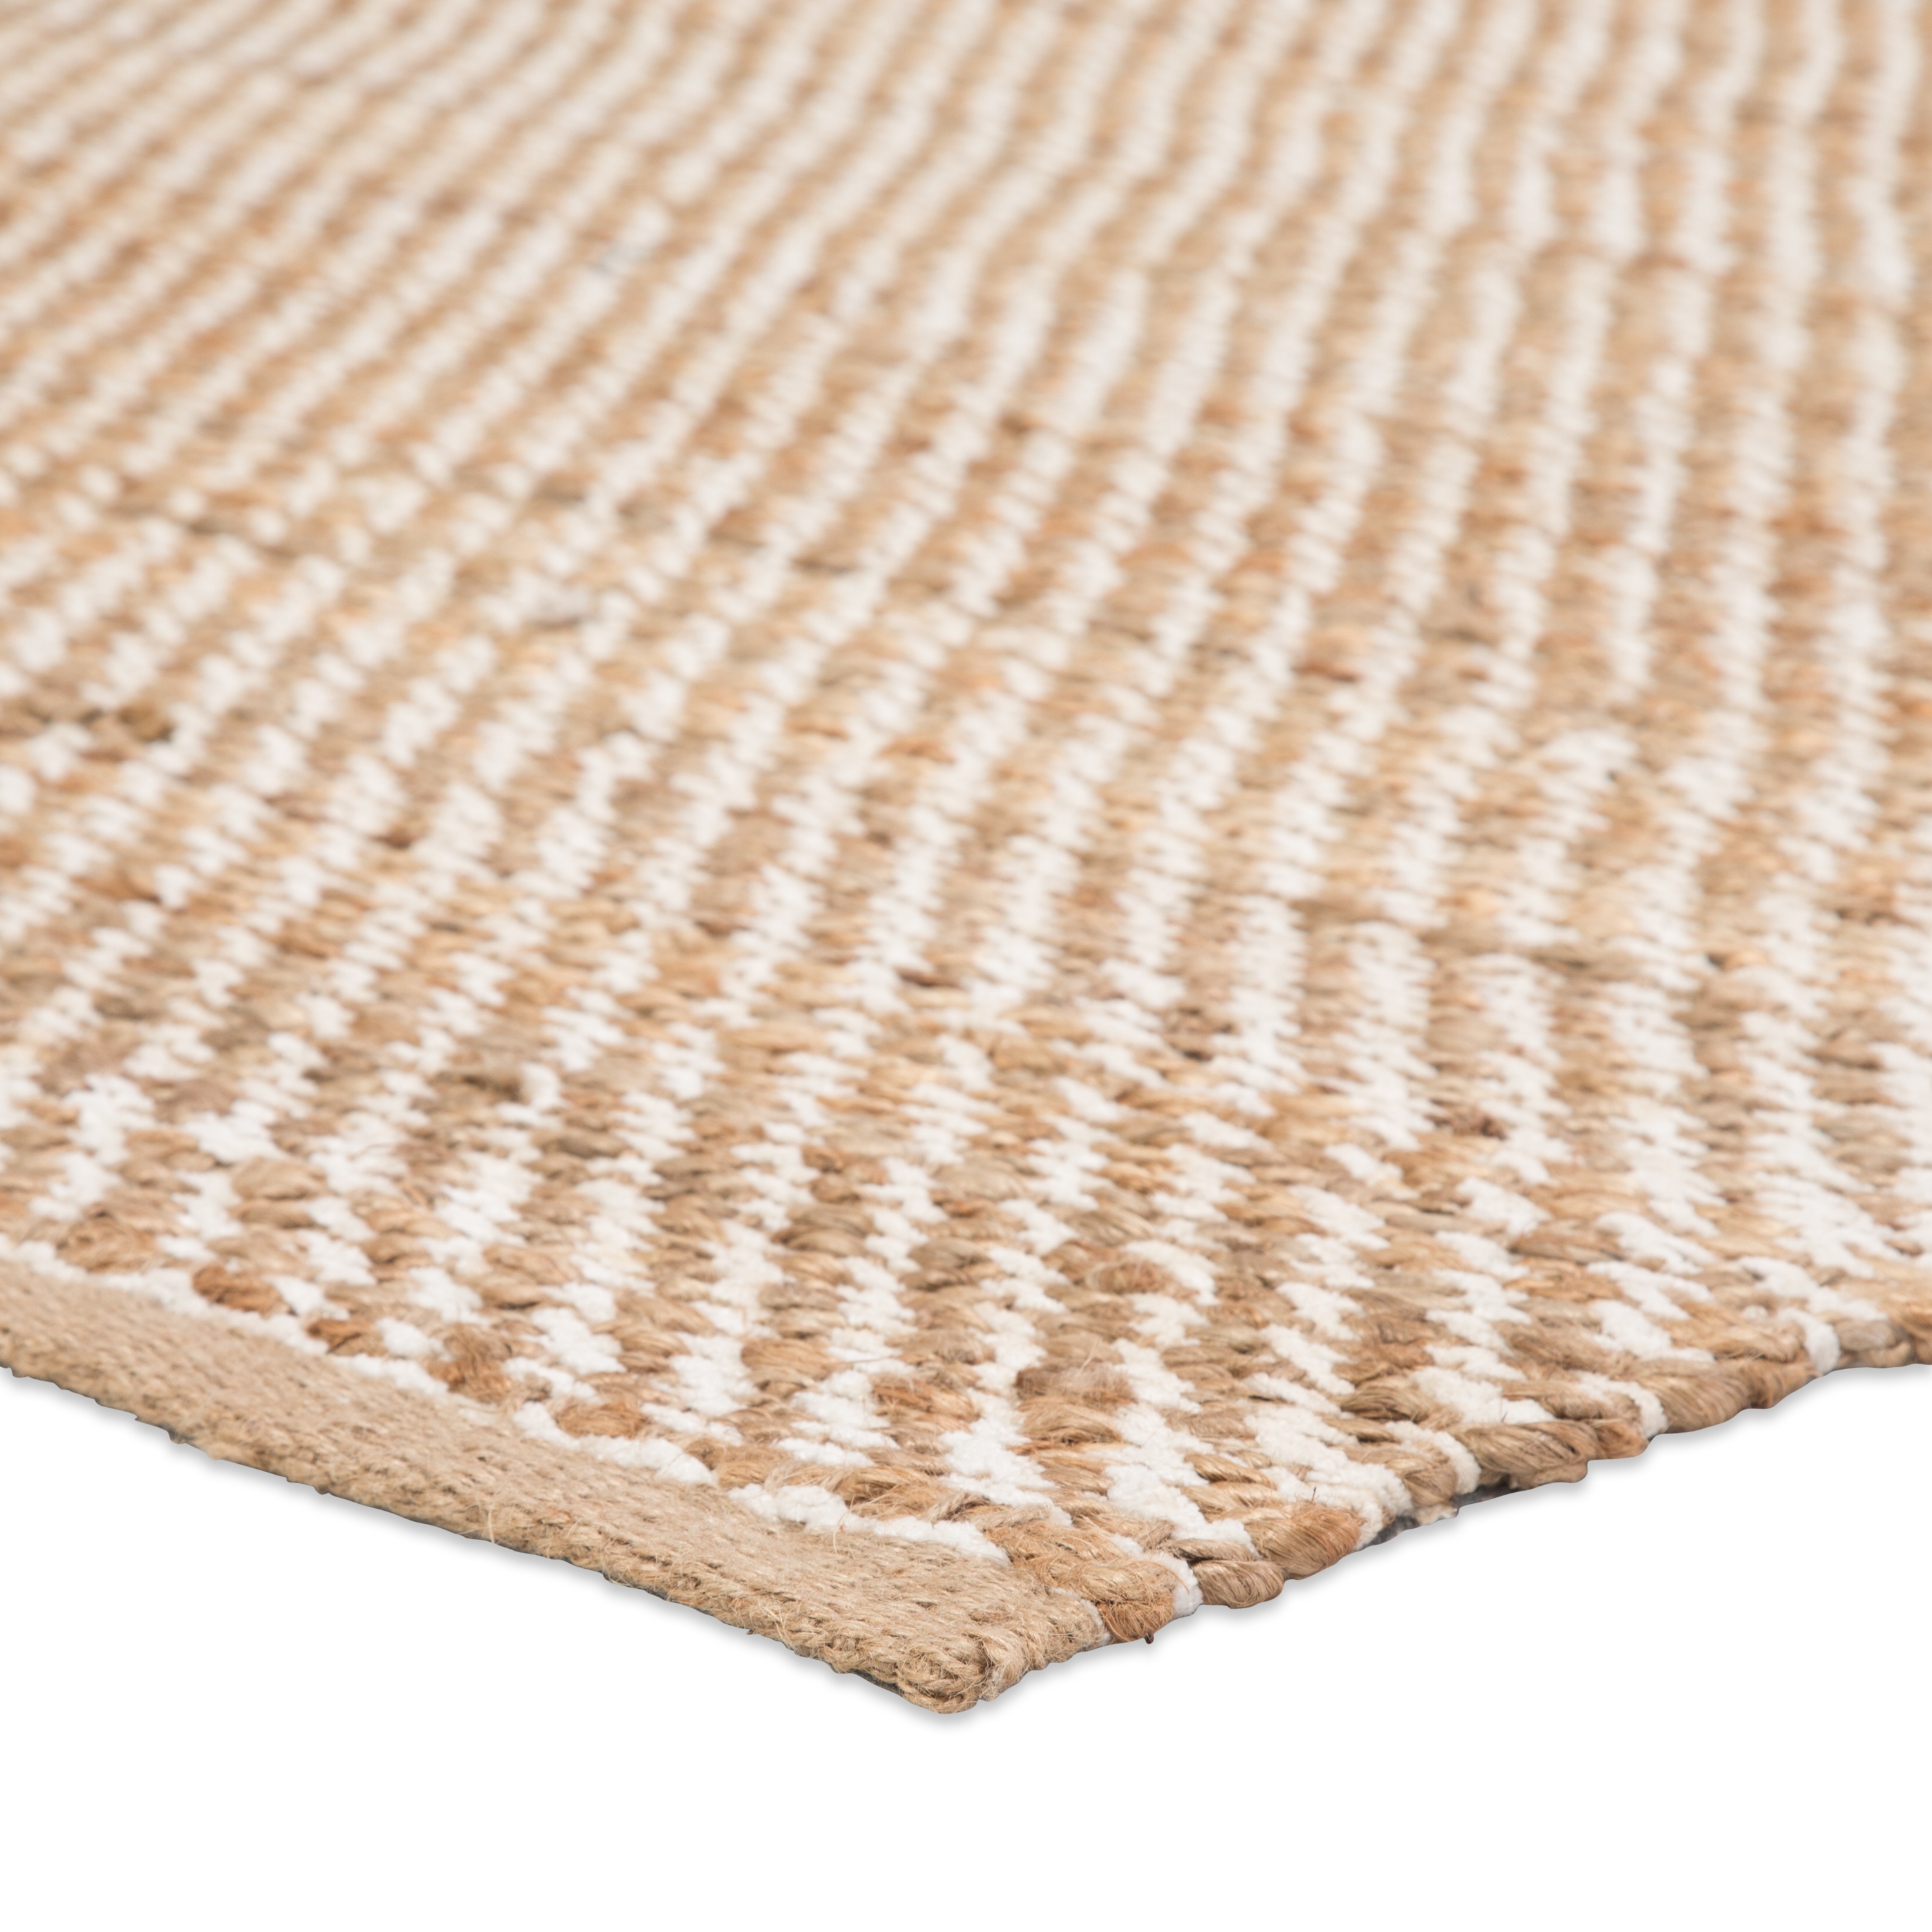 Diagonal Weave Natural Solid Beige/ White Area Rug (8' X 10') - Image 1